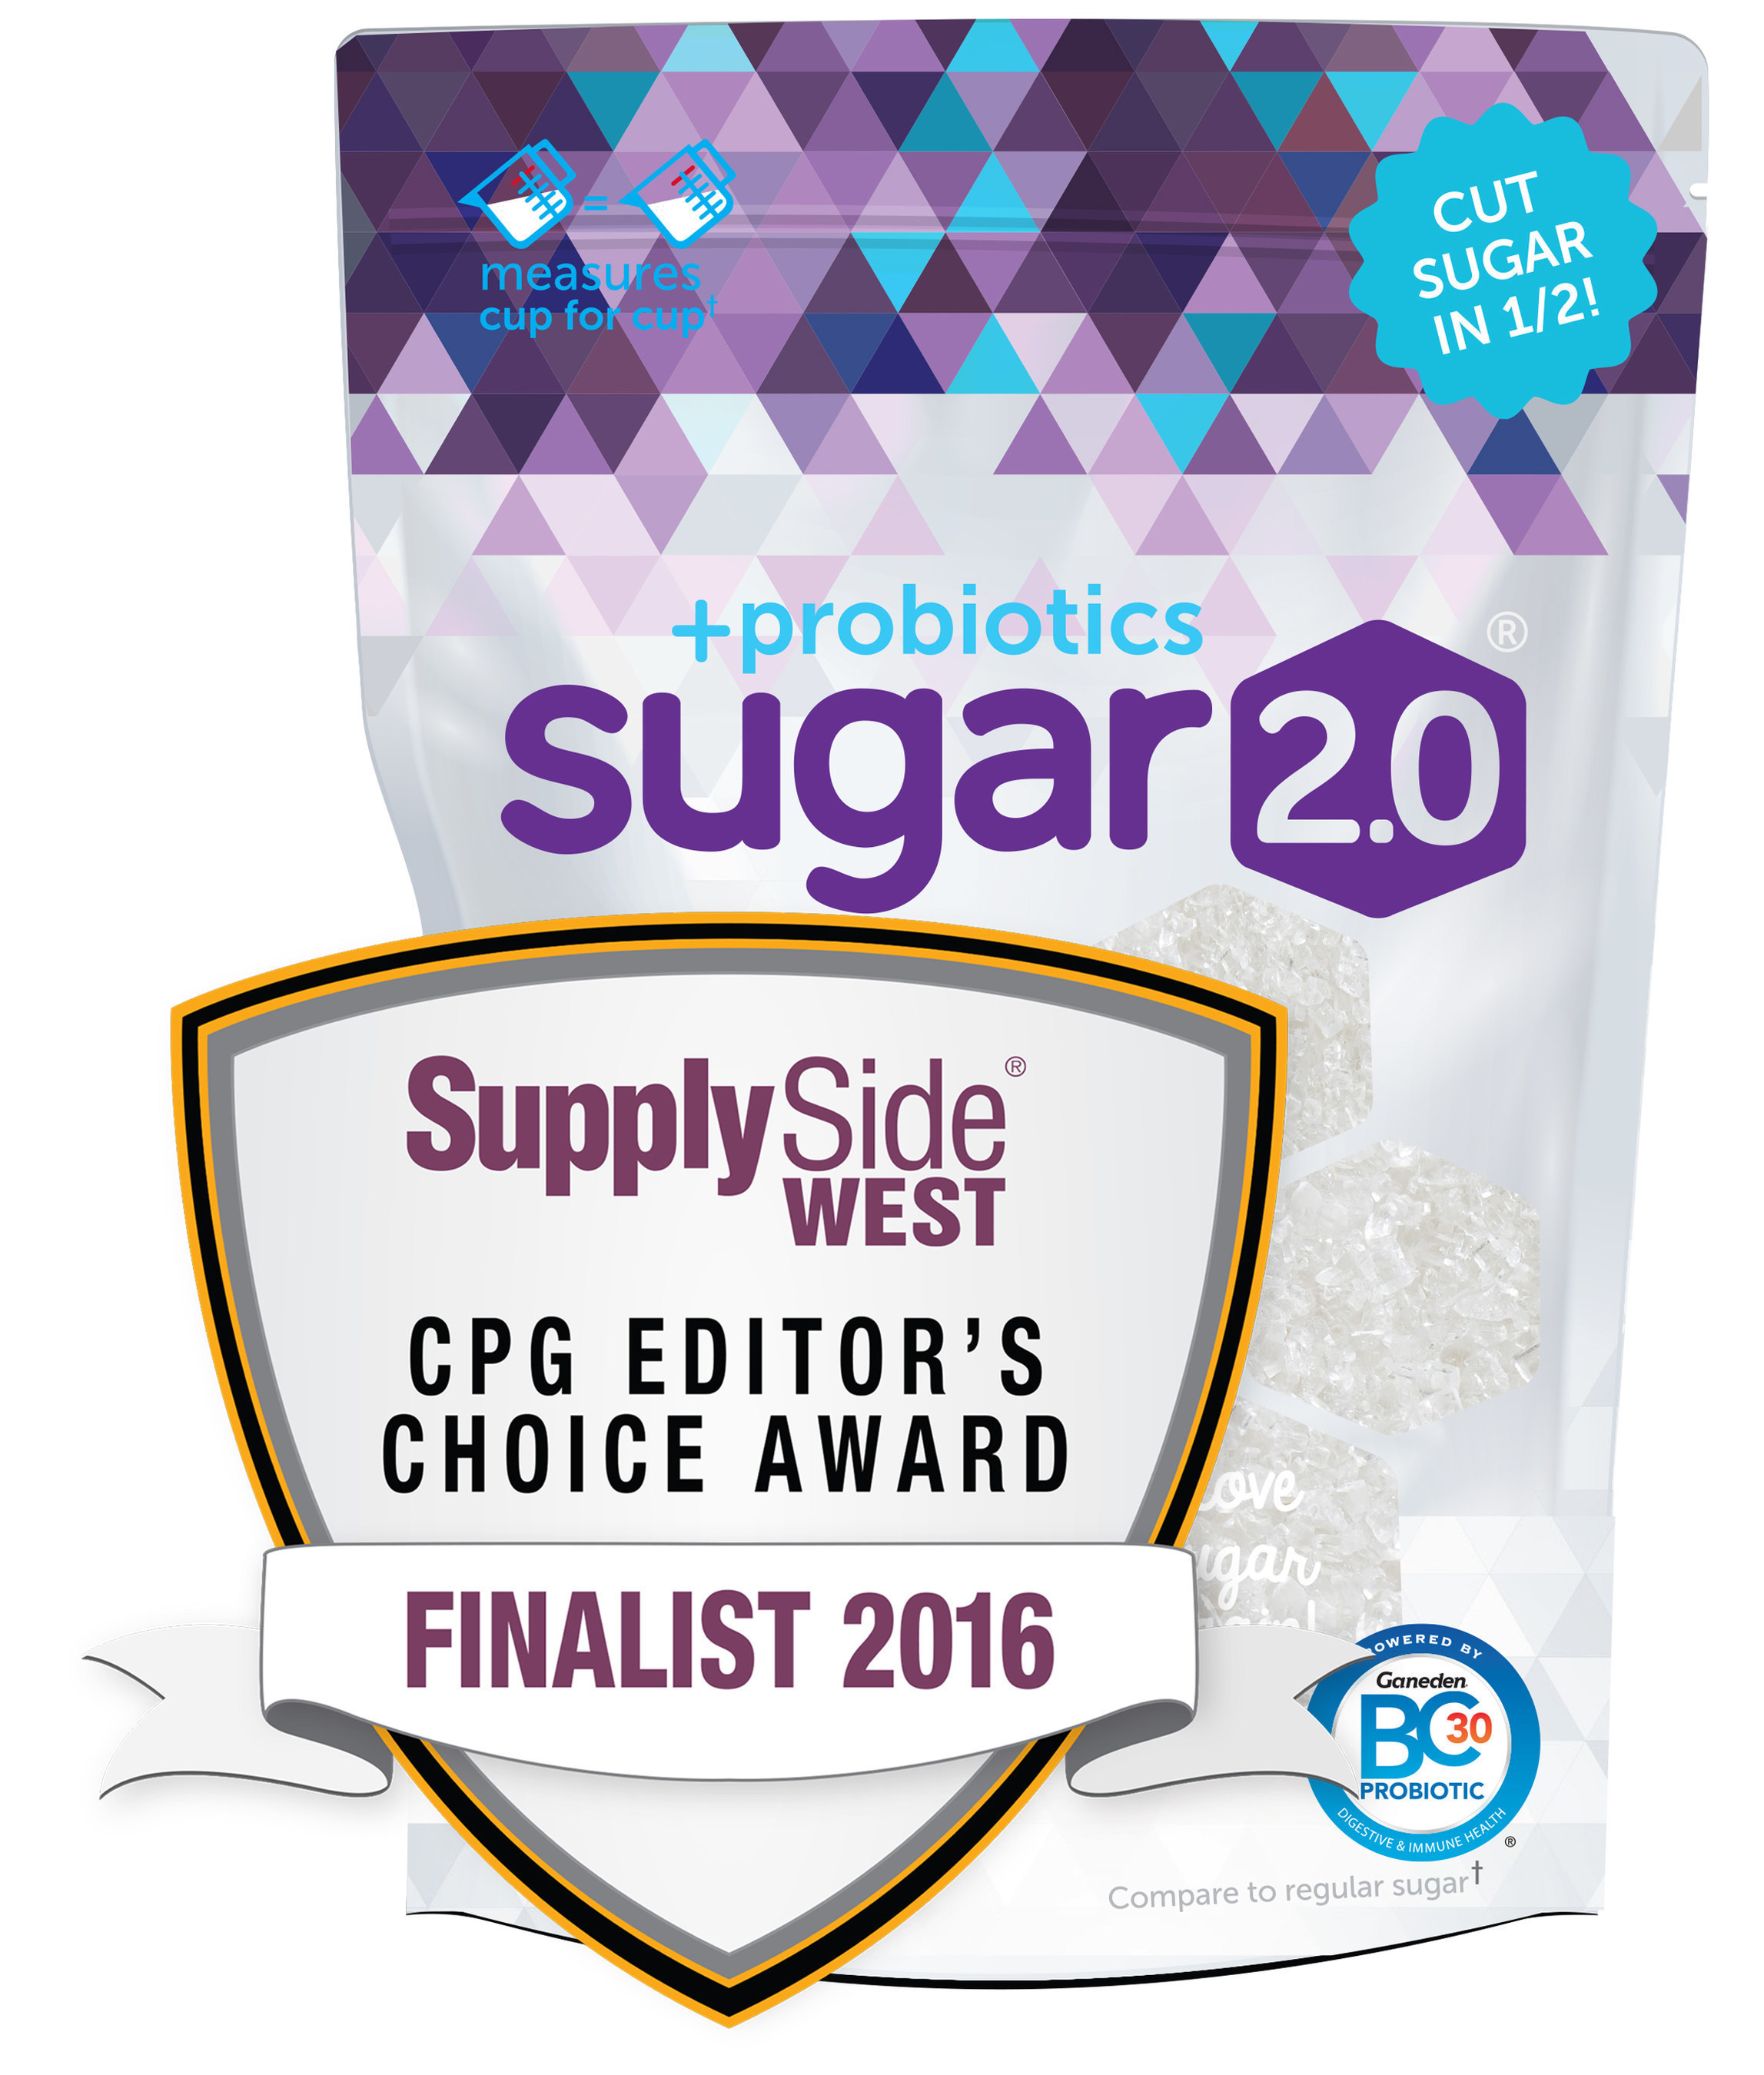 Sugar 2.0 + Probiotics Named Among Top CPG Products for Innovation and Market Impact